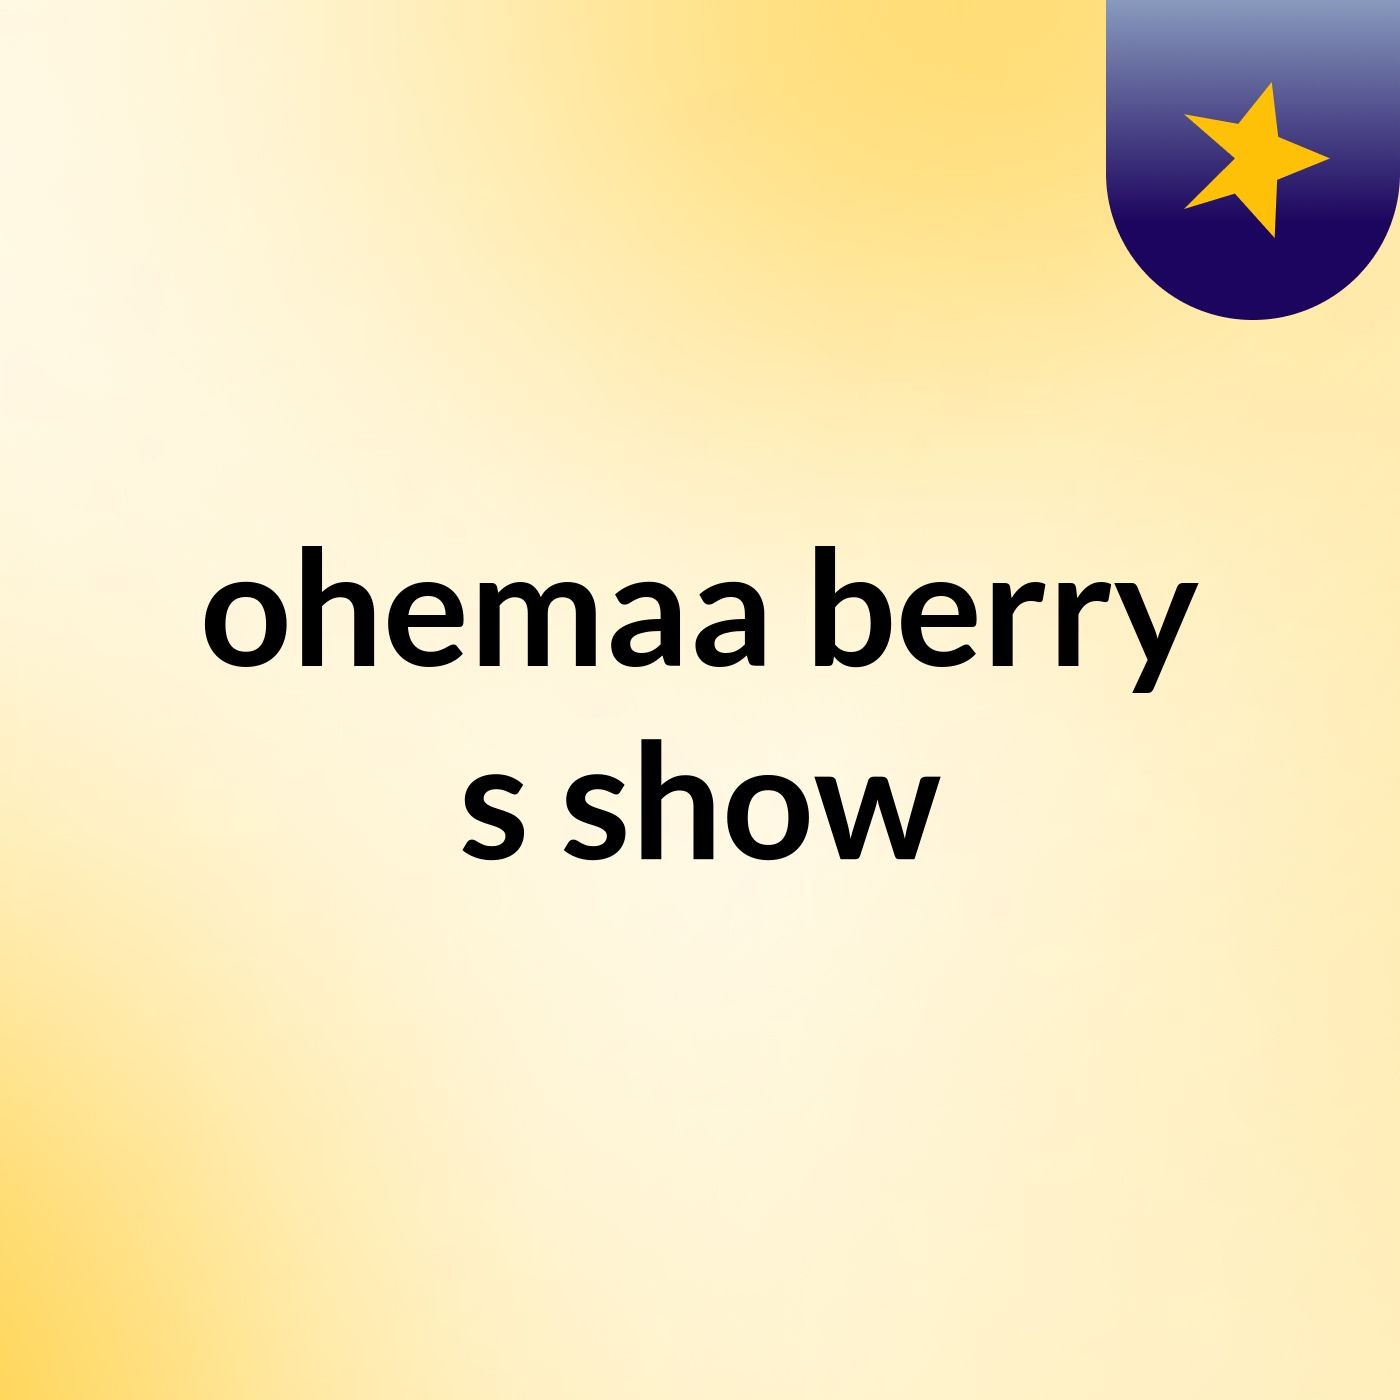 ohemaa berry's show